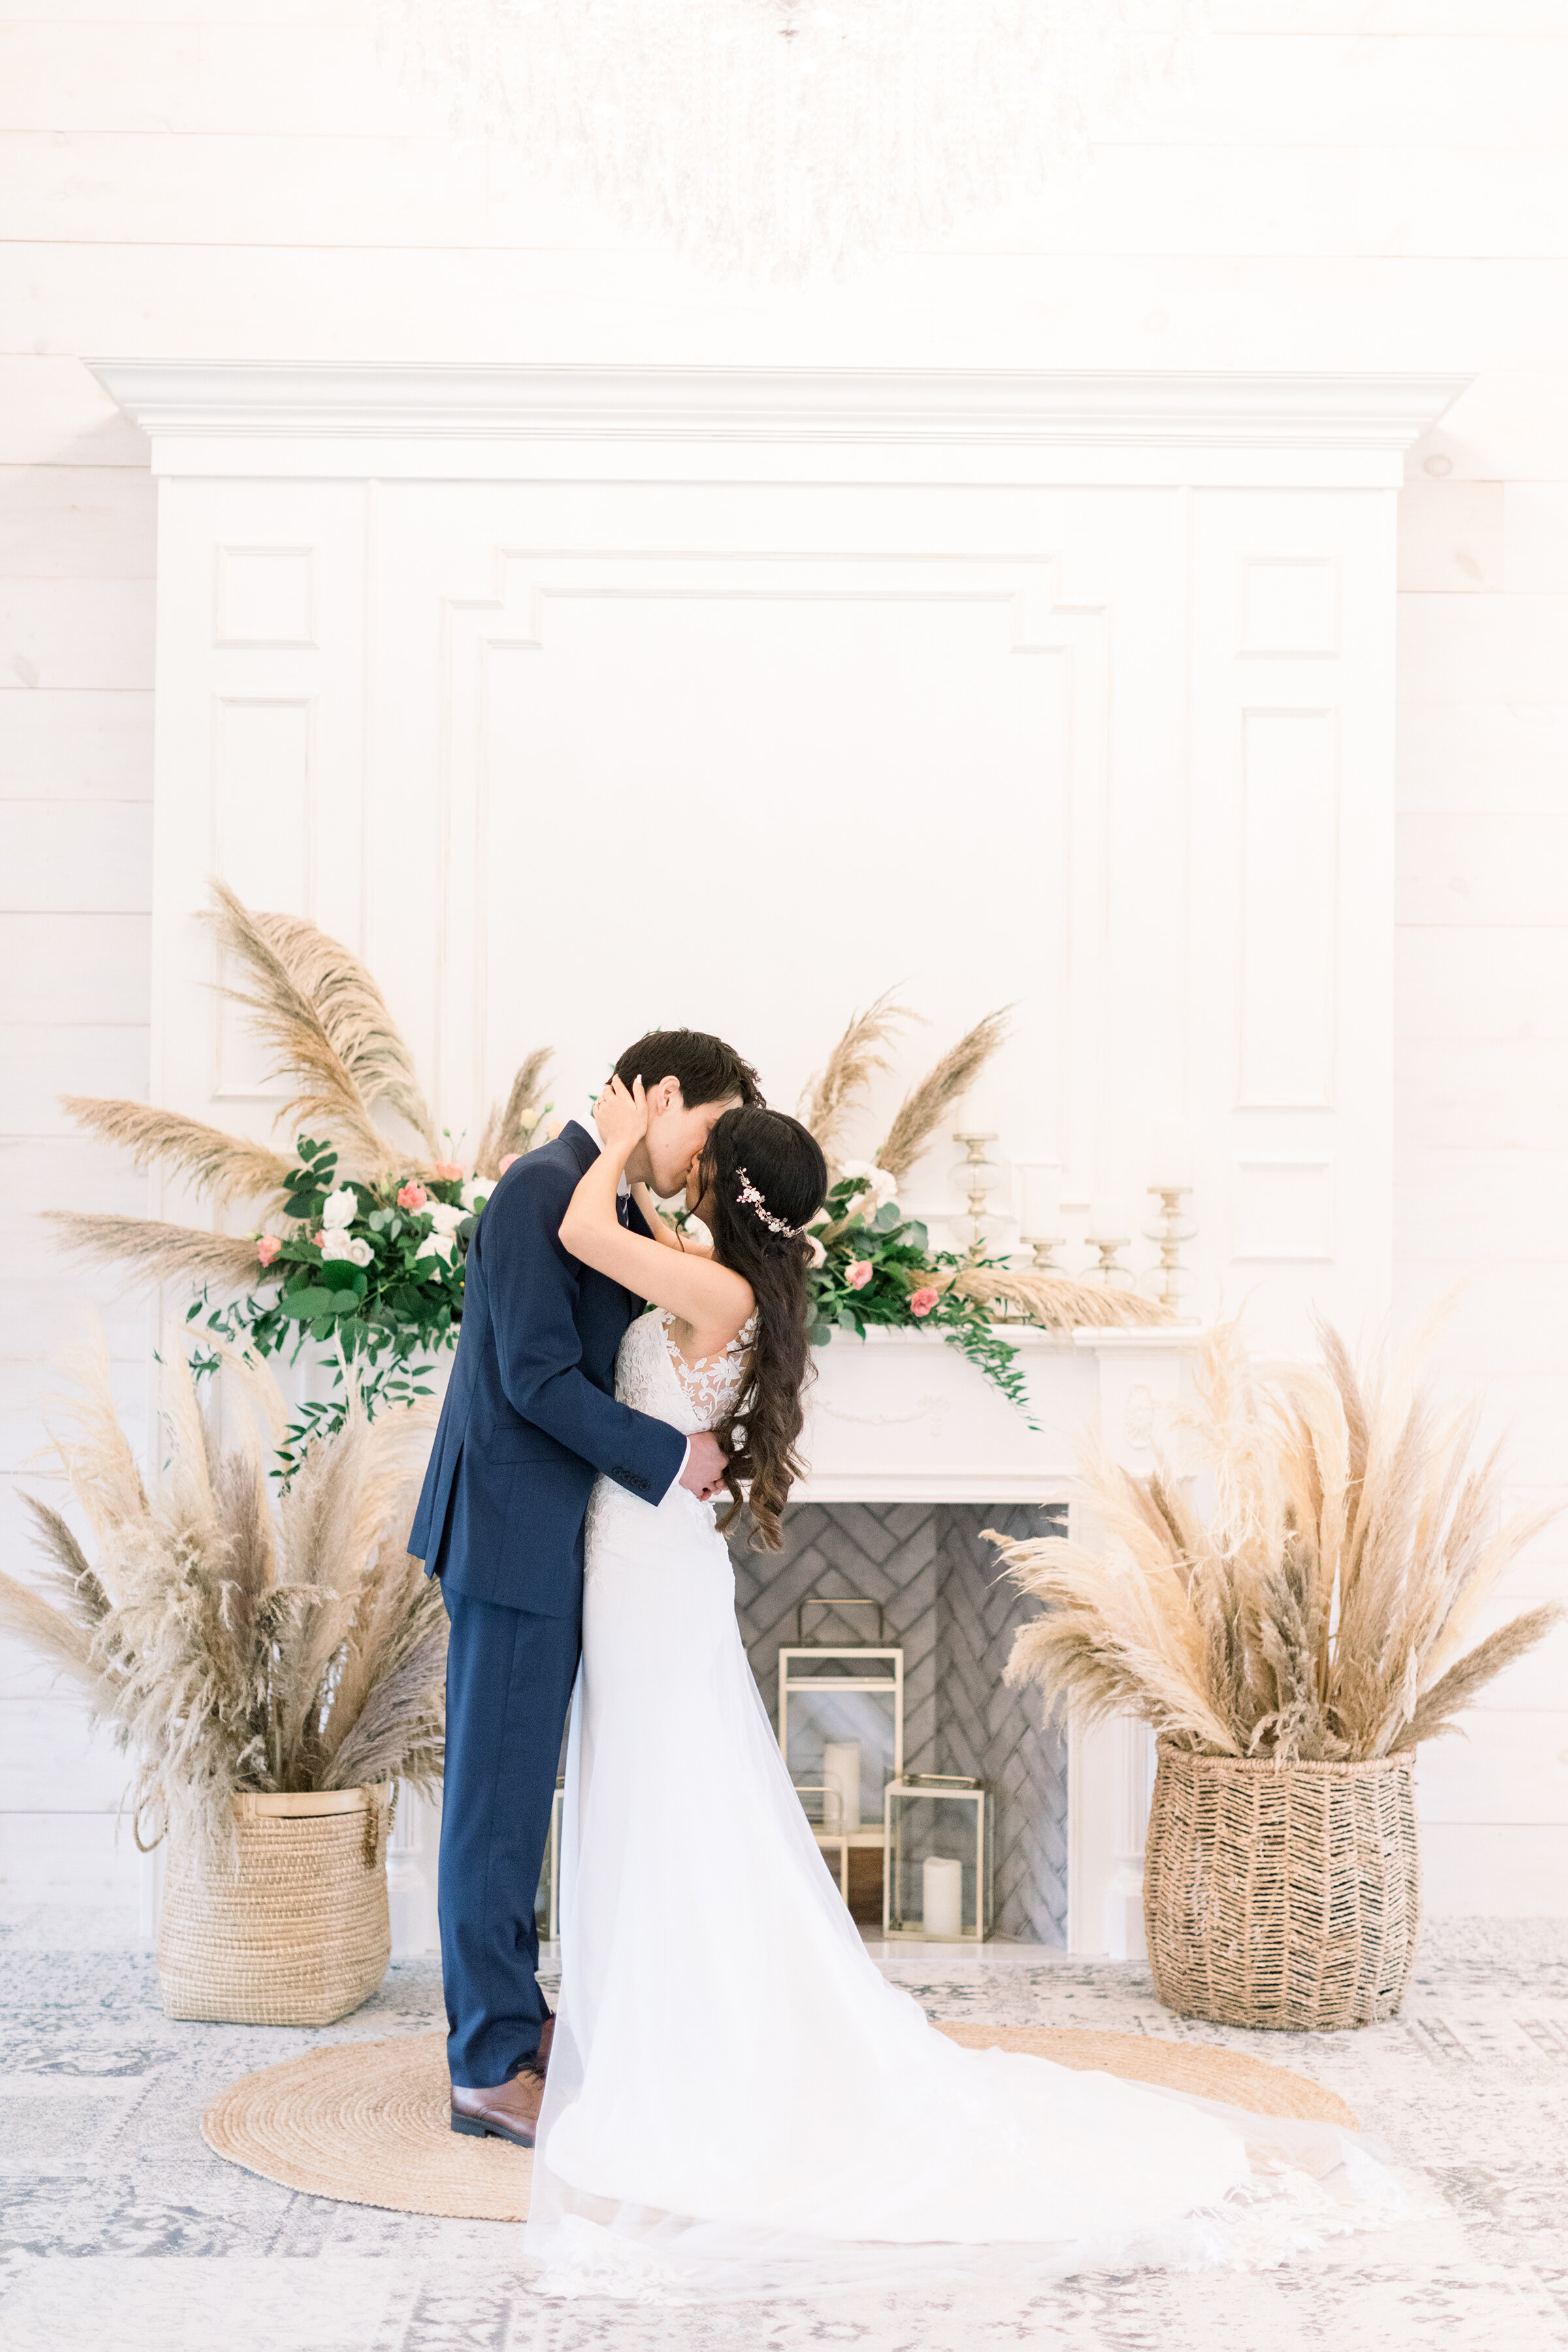  A stunning couple kiss at the wedding alter in a beautiful wedding day photo shoot at Stonefields Estates, Carleton Place, Ottawa by Chelsea Mason Photography. Wedding alter inspiration ideas and goals kissing couple pose inspiration ideas and goals